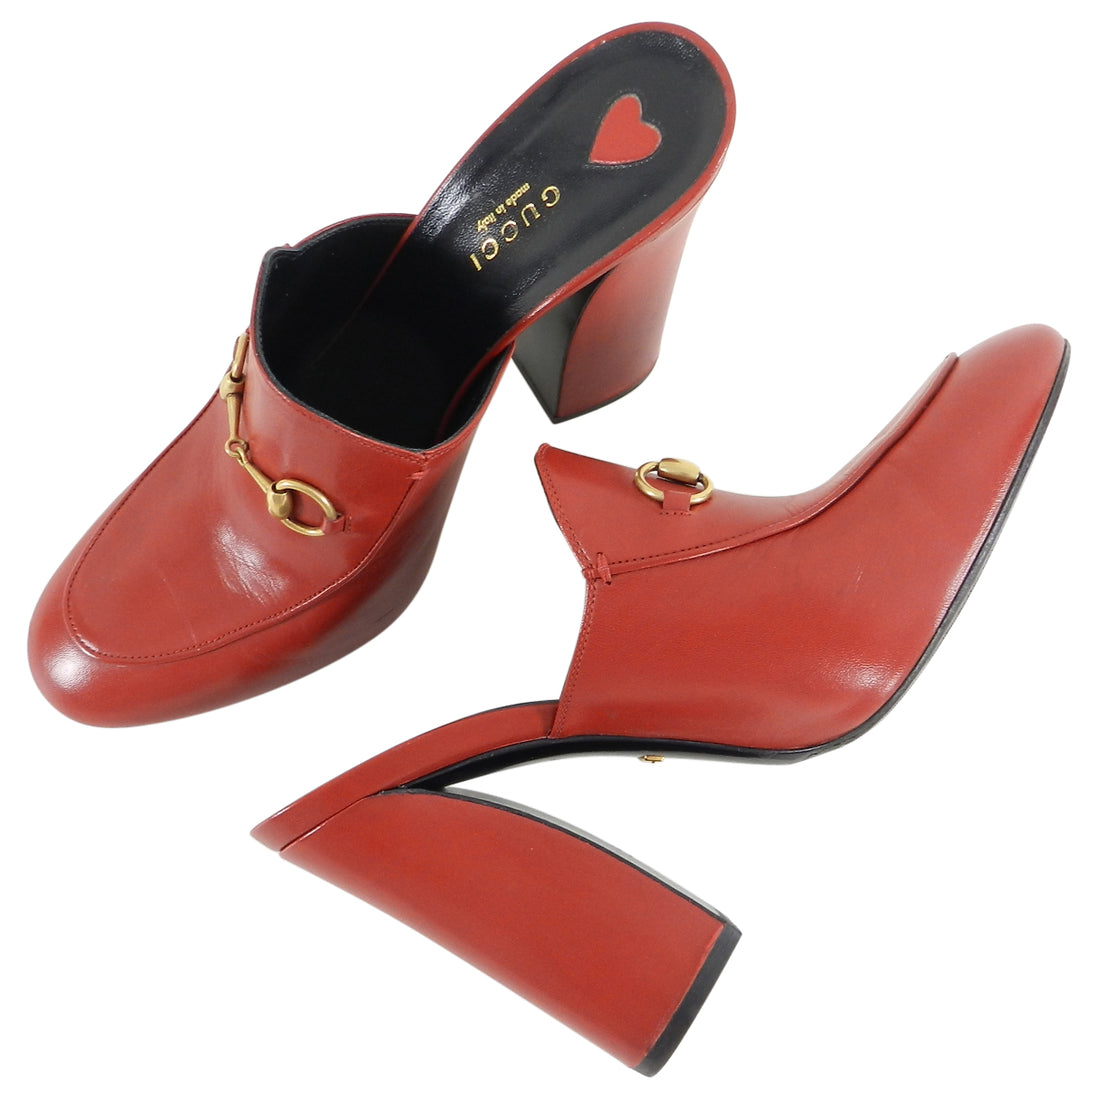 Gucci Red Leather “Julie” Princetown High Heel Mules - 40